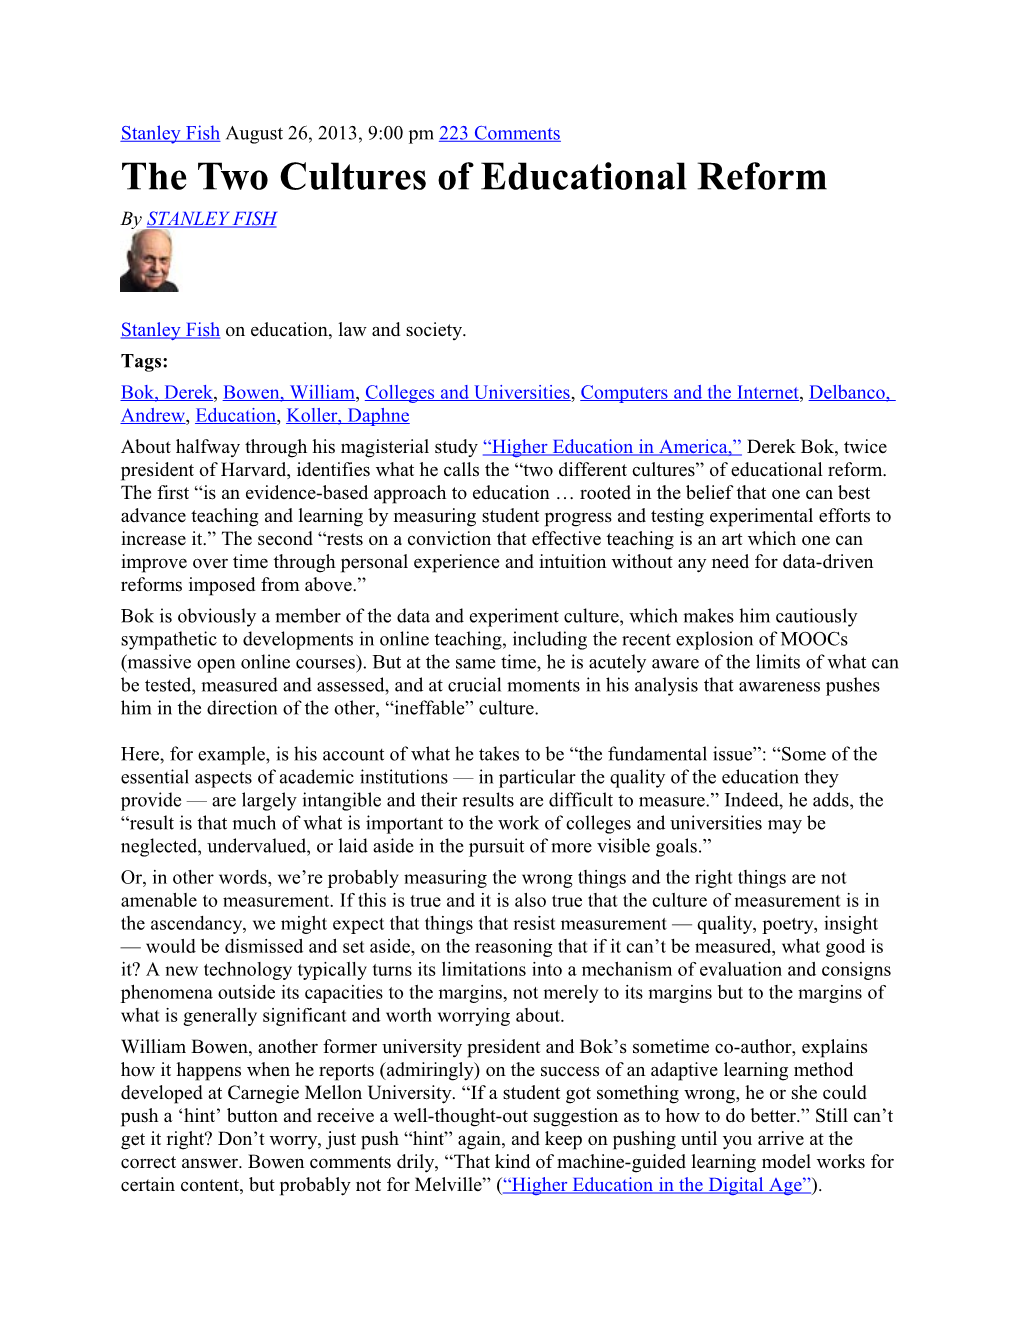 The Two Cultures of Educational Reform